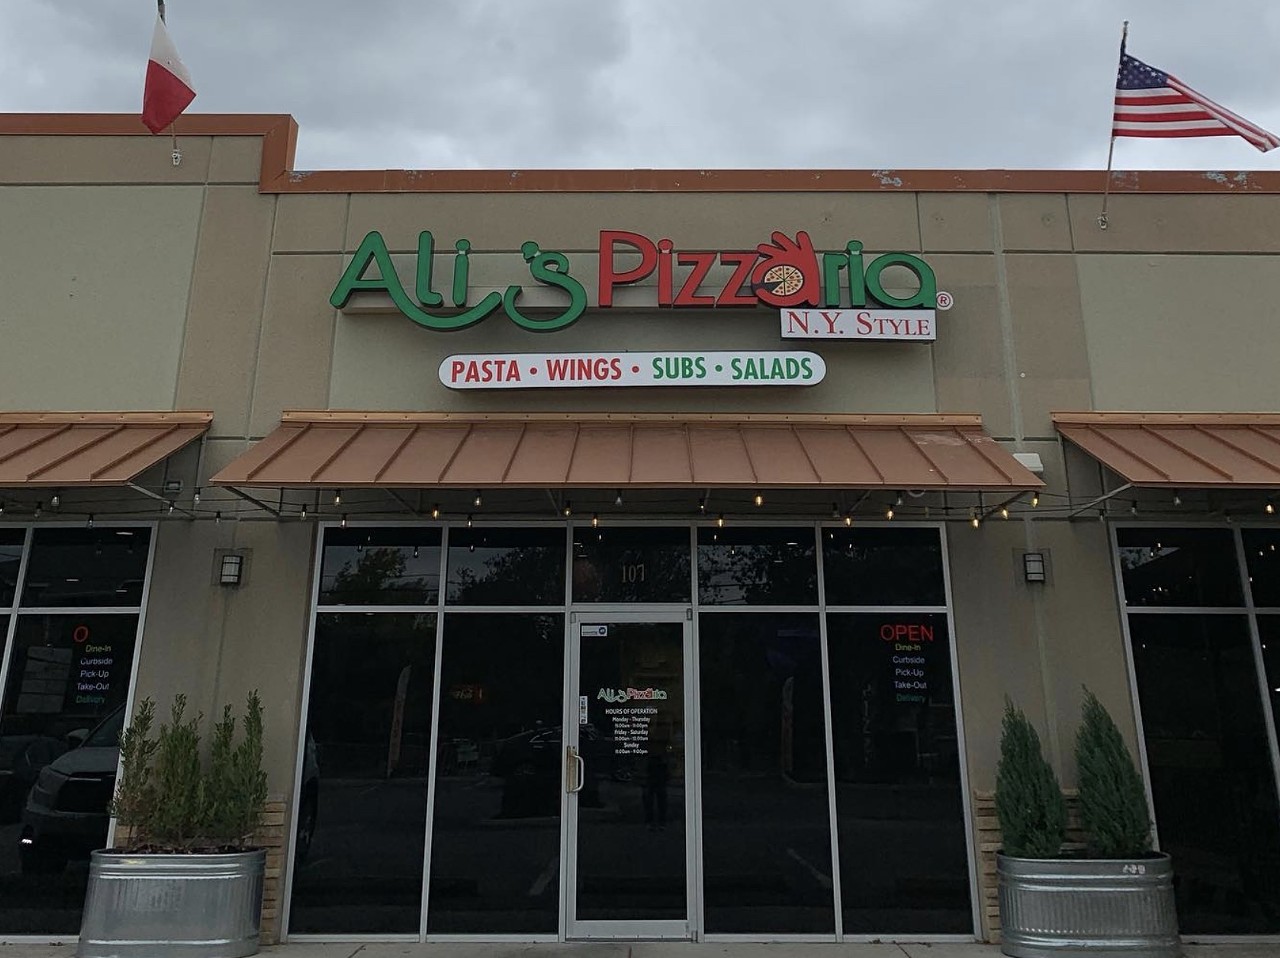 Ali's Pizzaria 
Multiple Locations, alispizzaria.com
Ali's serves white sauce, pesto and traditional pizzas, including a build your own option. The restaurant has two locations in the Alamo City to try out.